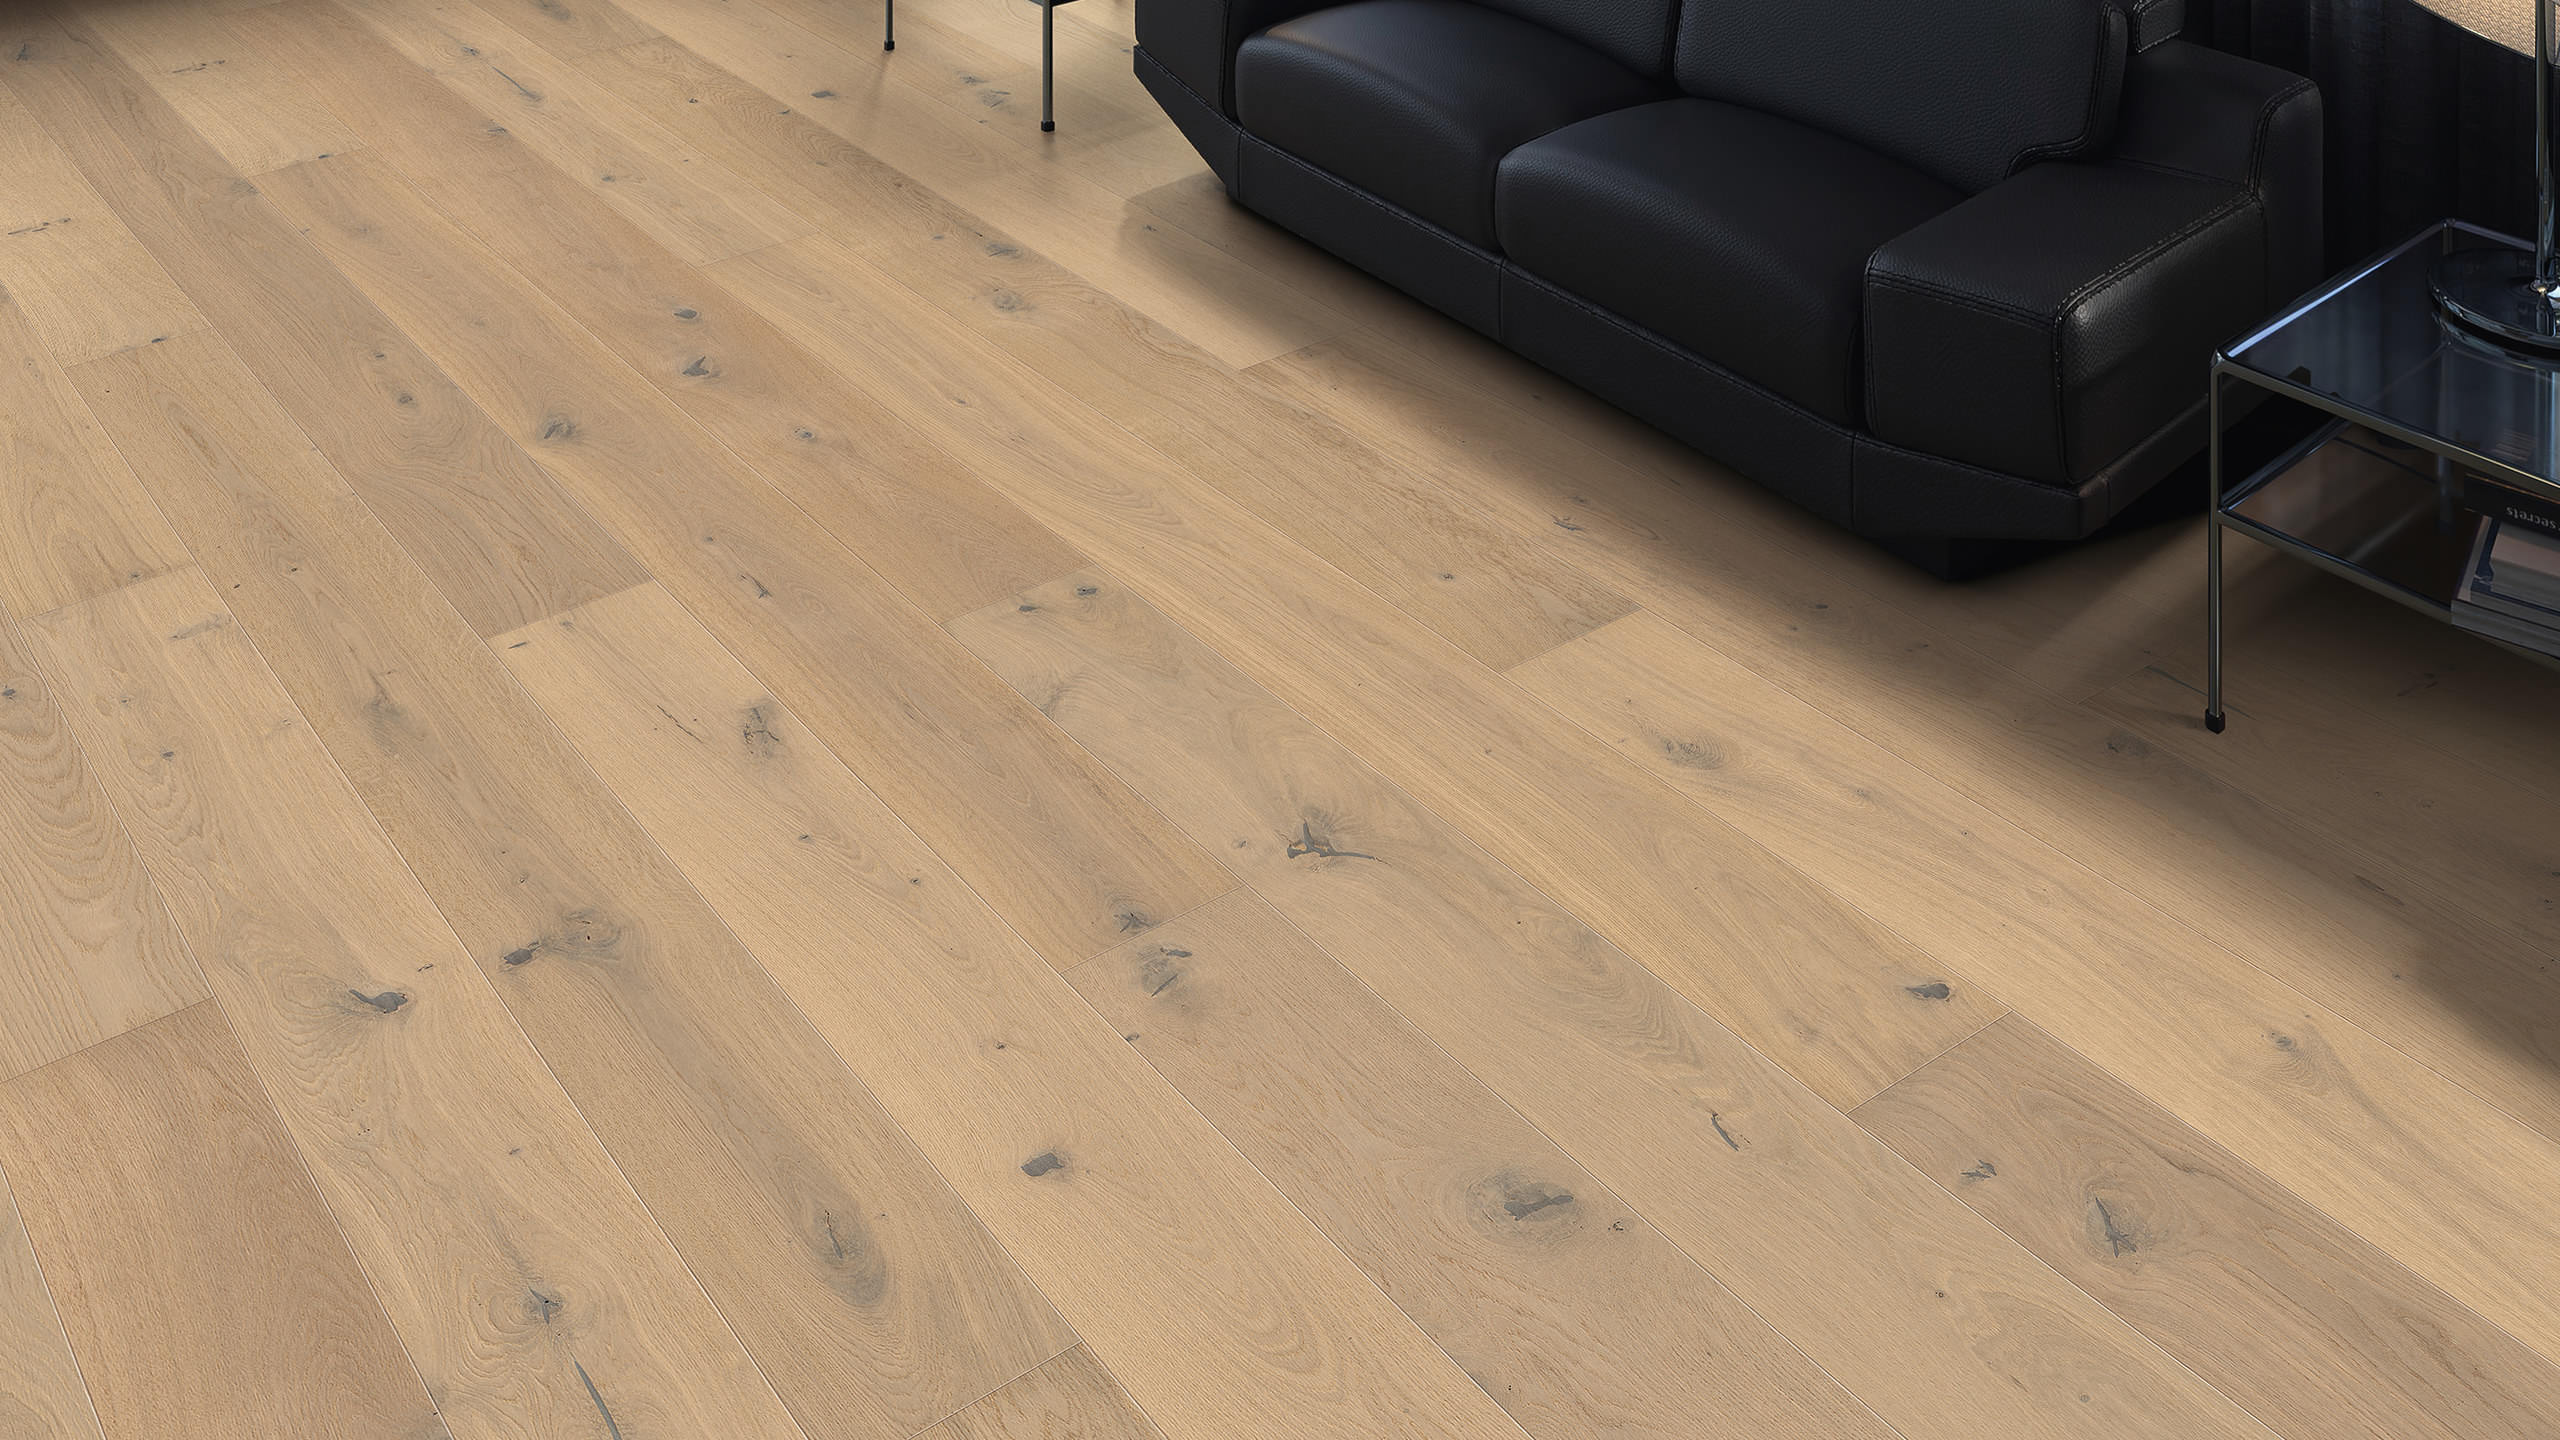 HARO PARQUET 4000 Plank 1-Strip 180 4V Oak Light White Sauvage brushed naturaLin plus Top Connect